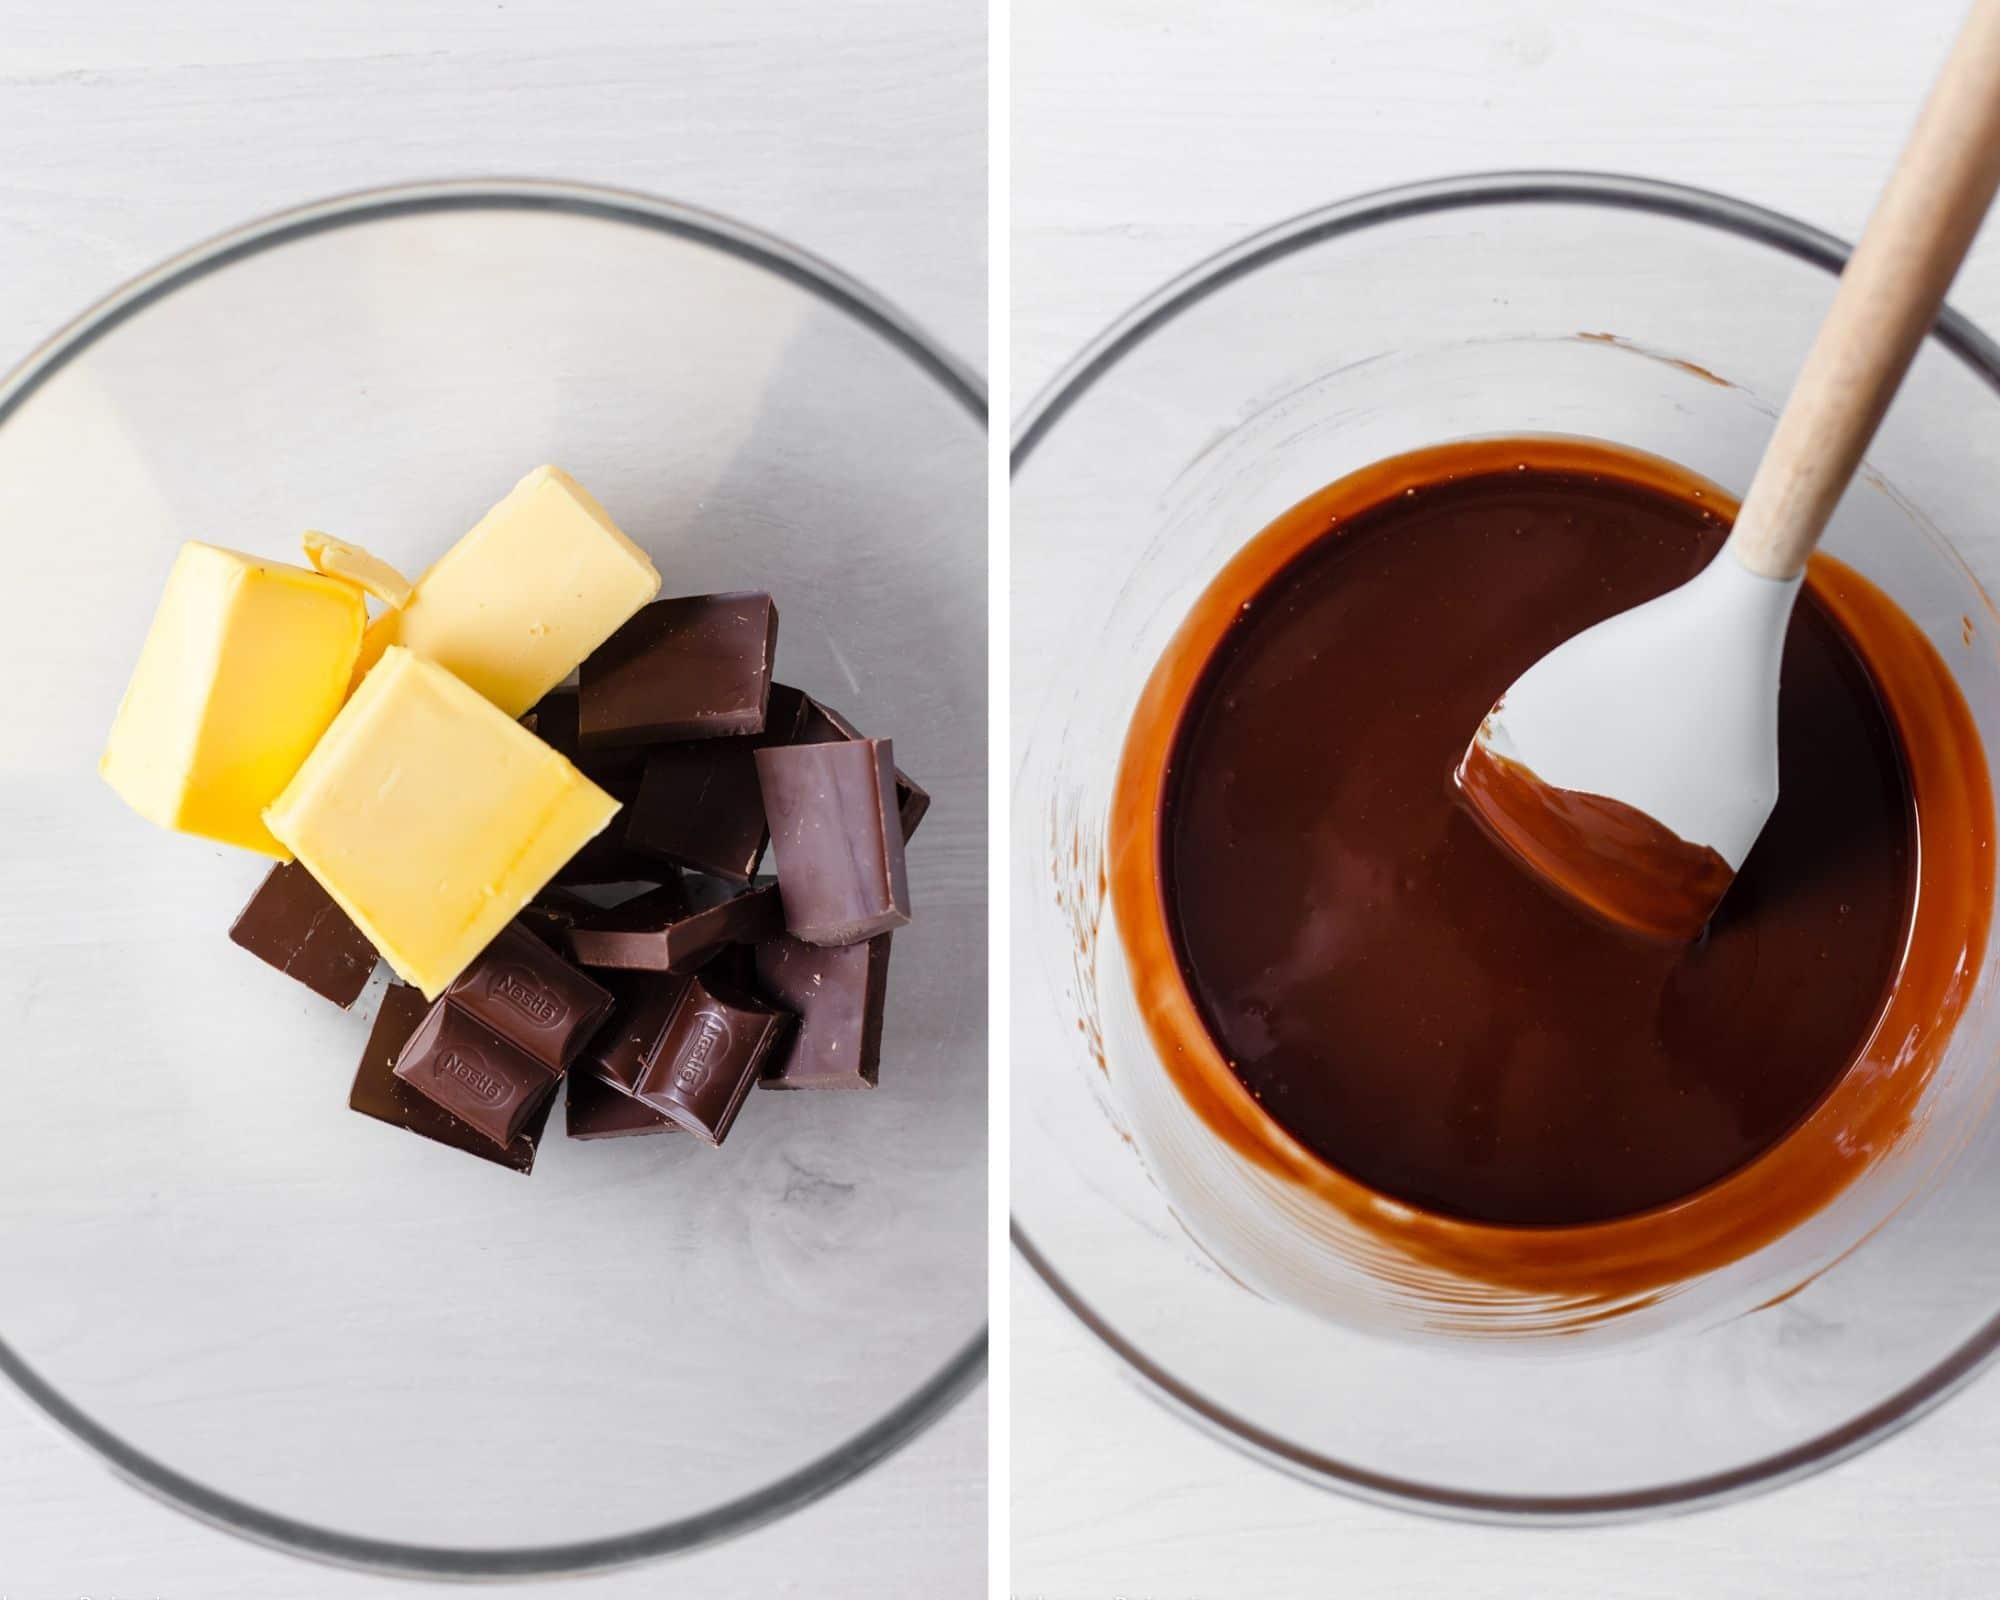 Melting the chocolate and butter together